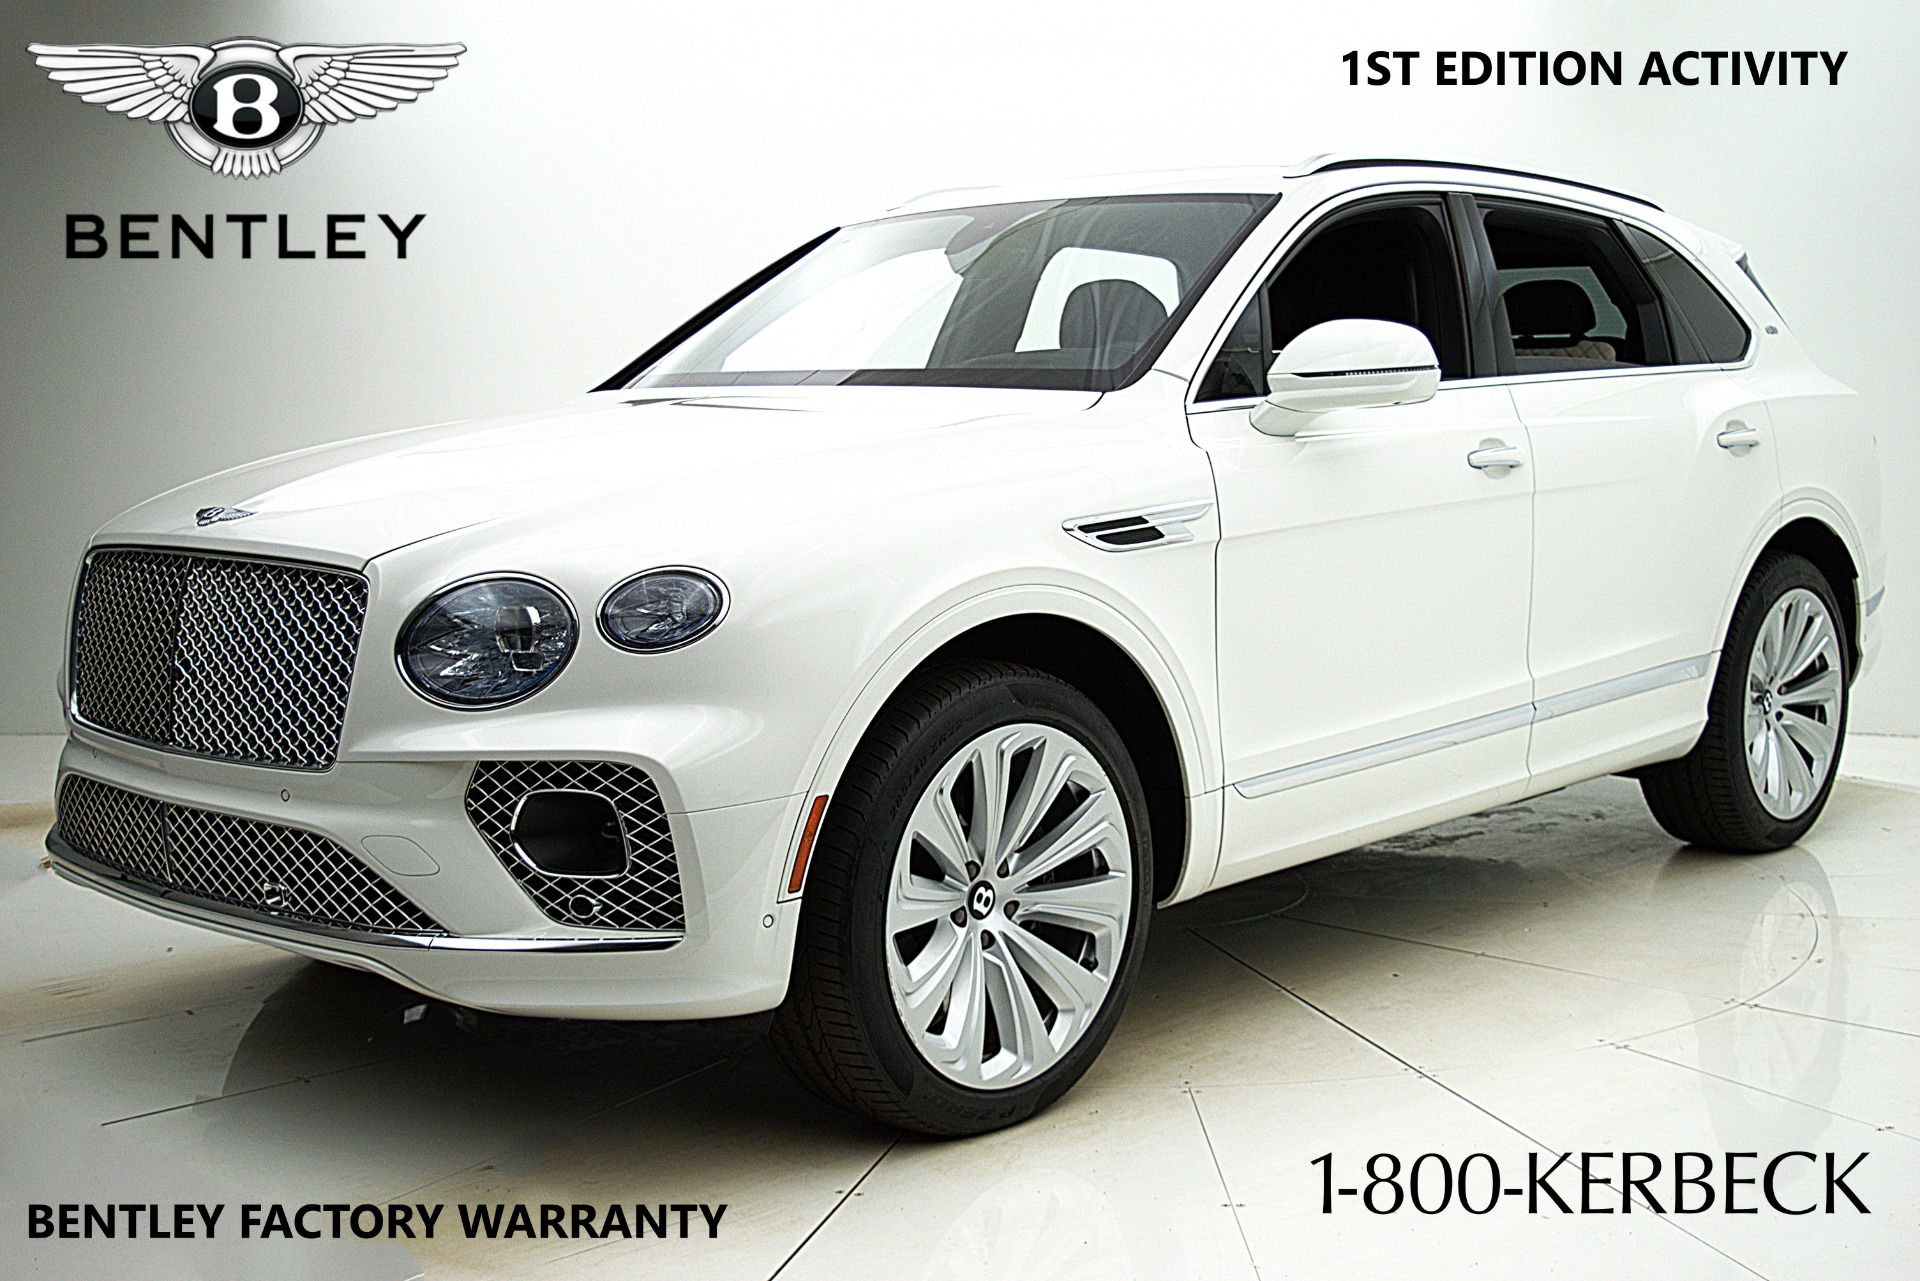 Used 2021 Bentley Bentayga First Edition Activity / LEASE OPTIONS AVAILABLE for sale Sold at Bentley Palmyra N.J. in Palmyra NJ 08065 2